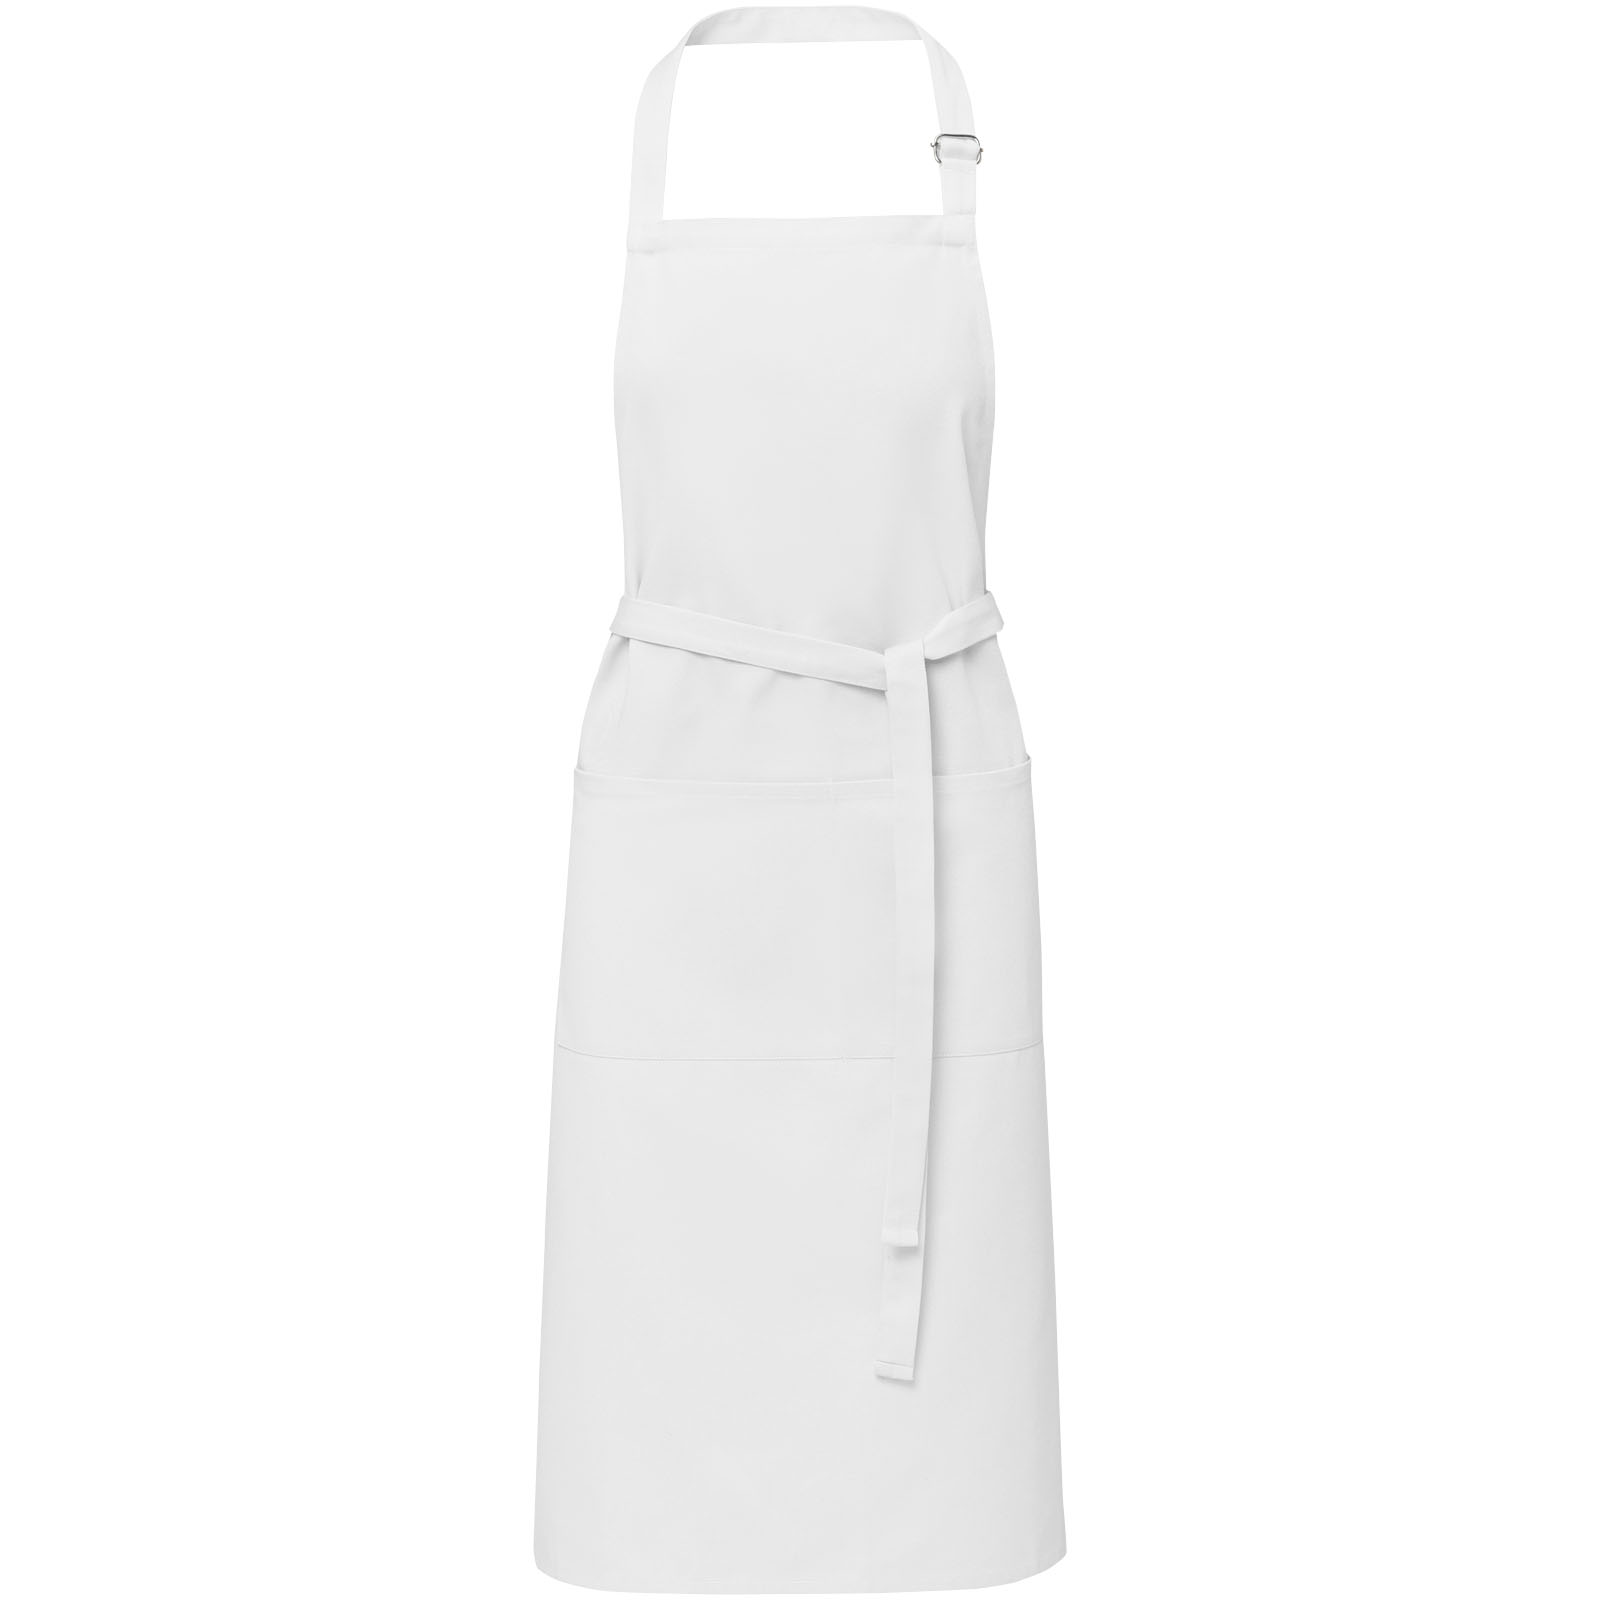 Advertising Aprons - Andrea 240 g/m² apron with adjustable neck strap